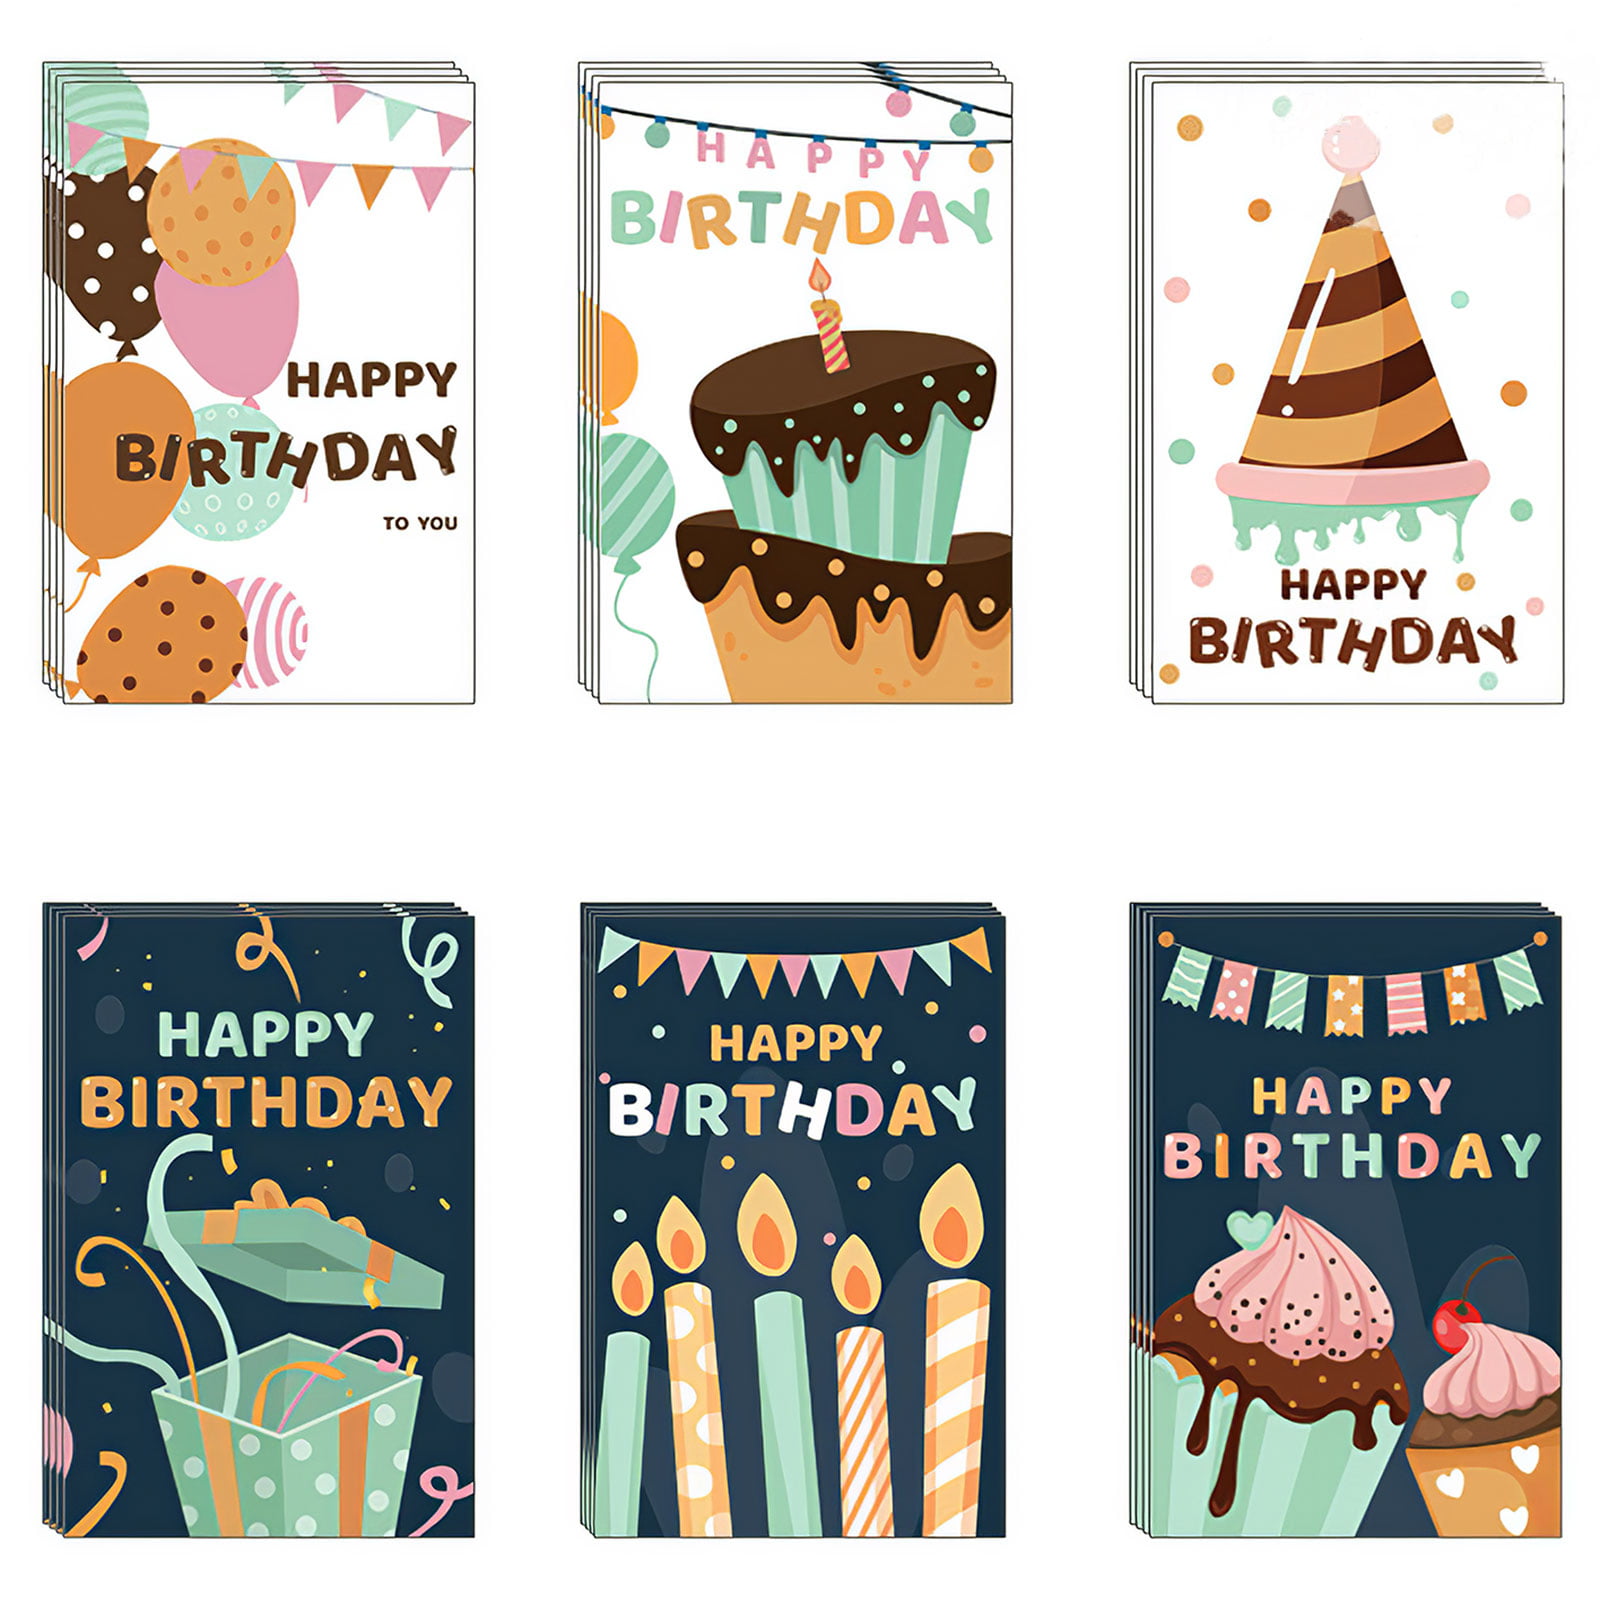 FATHER Birthday Wishes -Classic Details about   HAPPY BIRTHDAY CARD Hallmark Greeting Card 